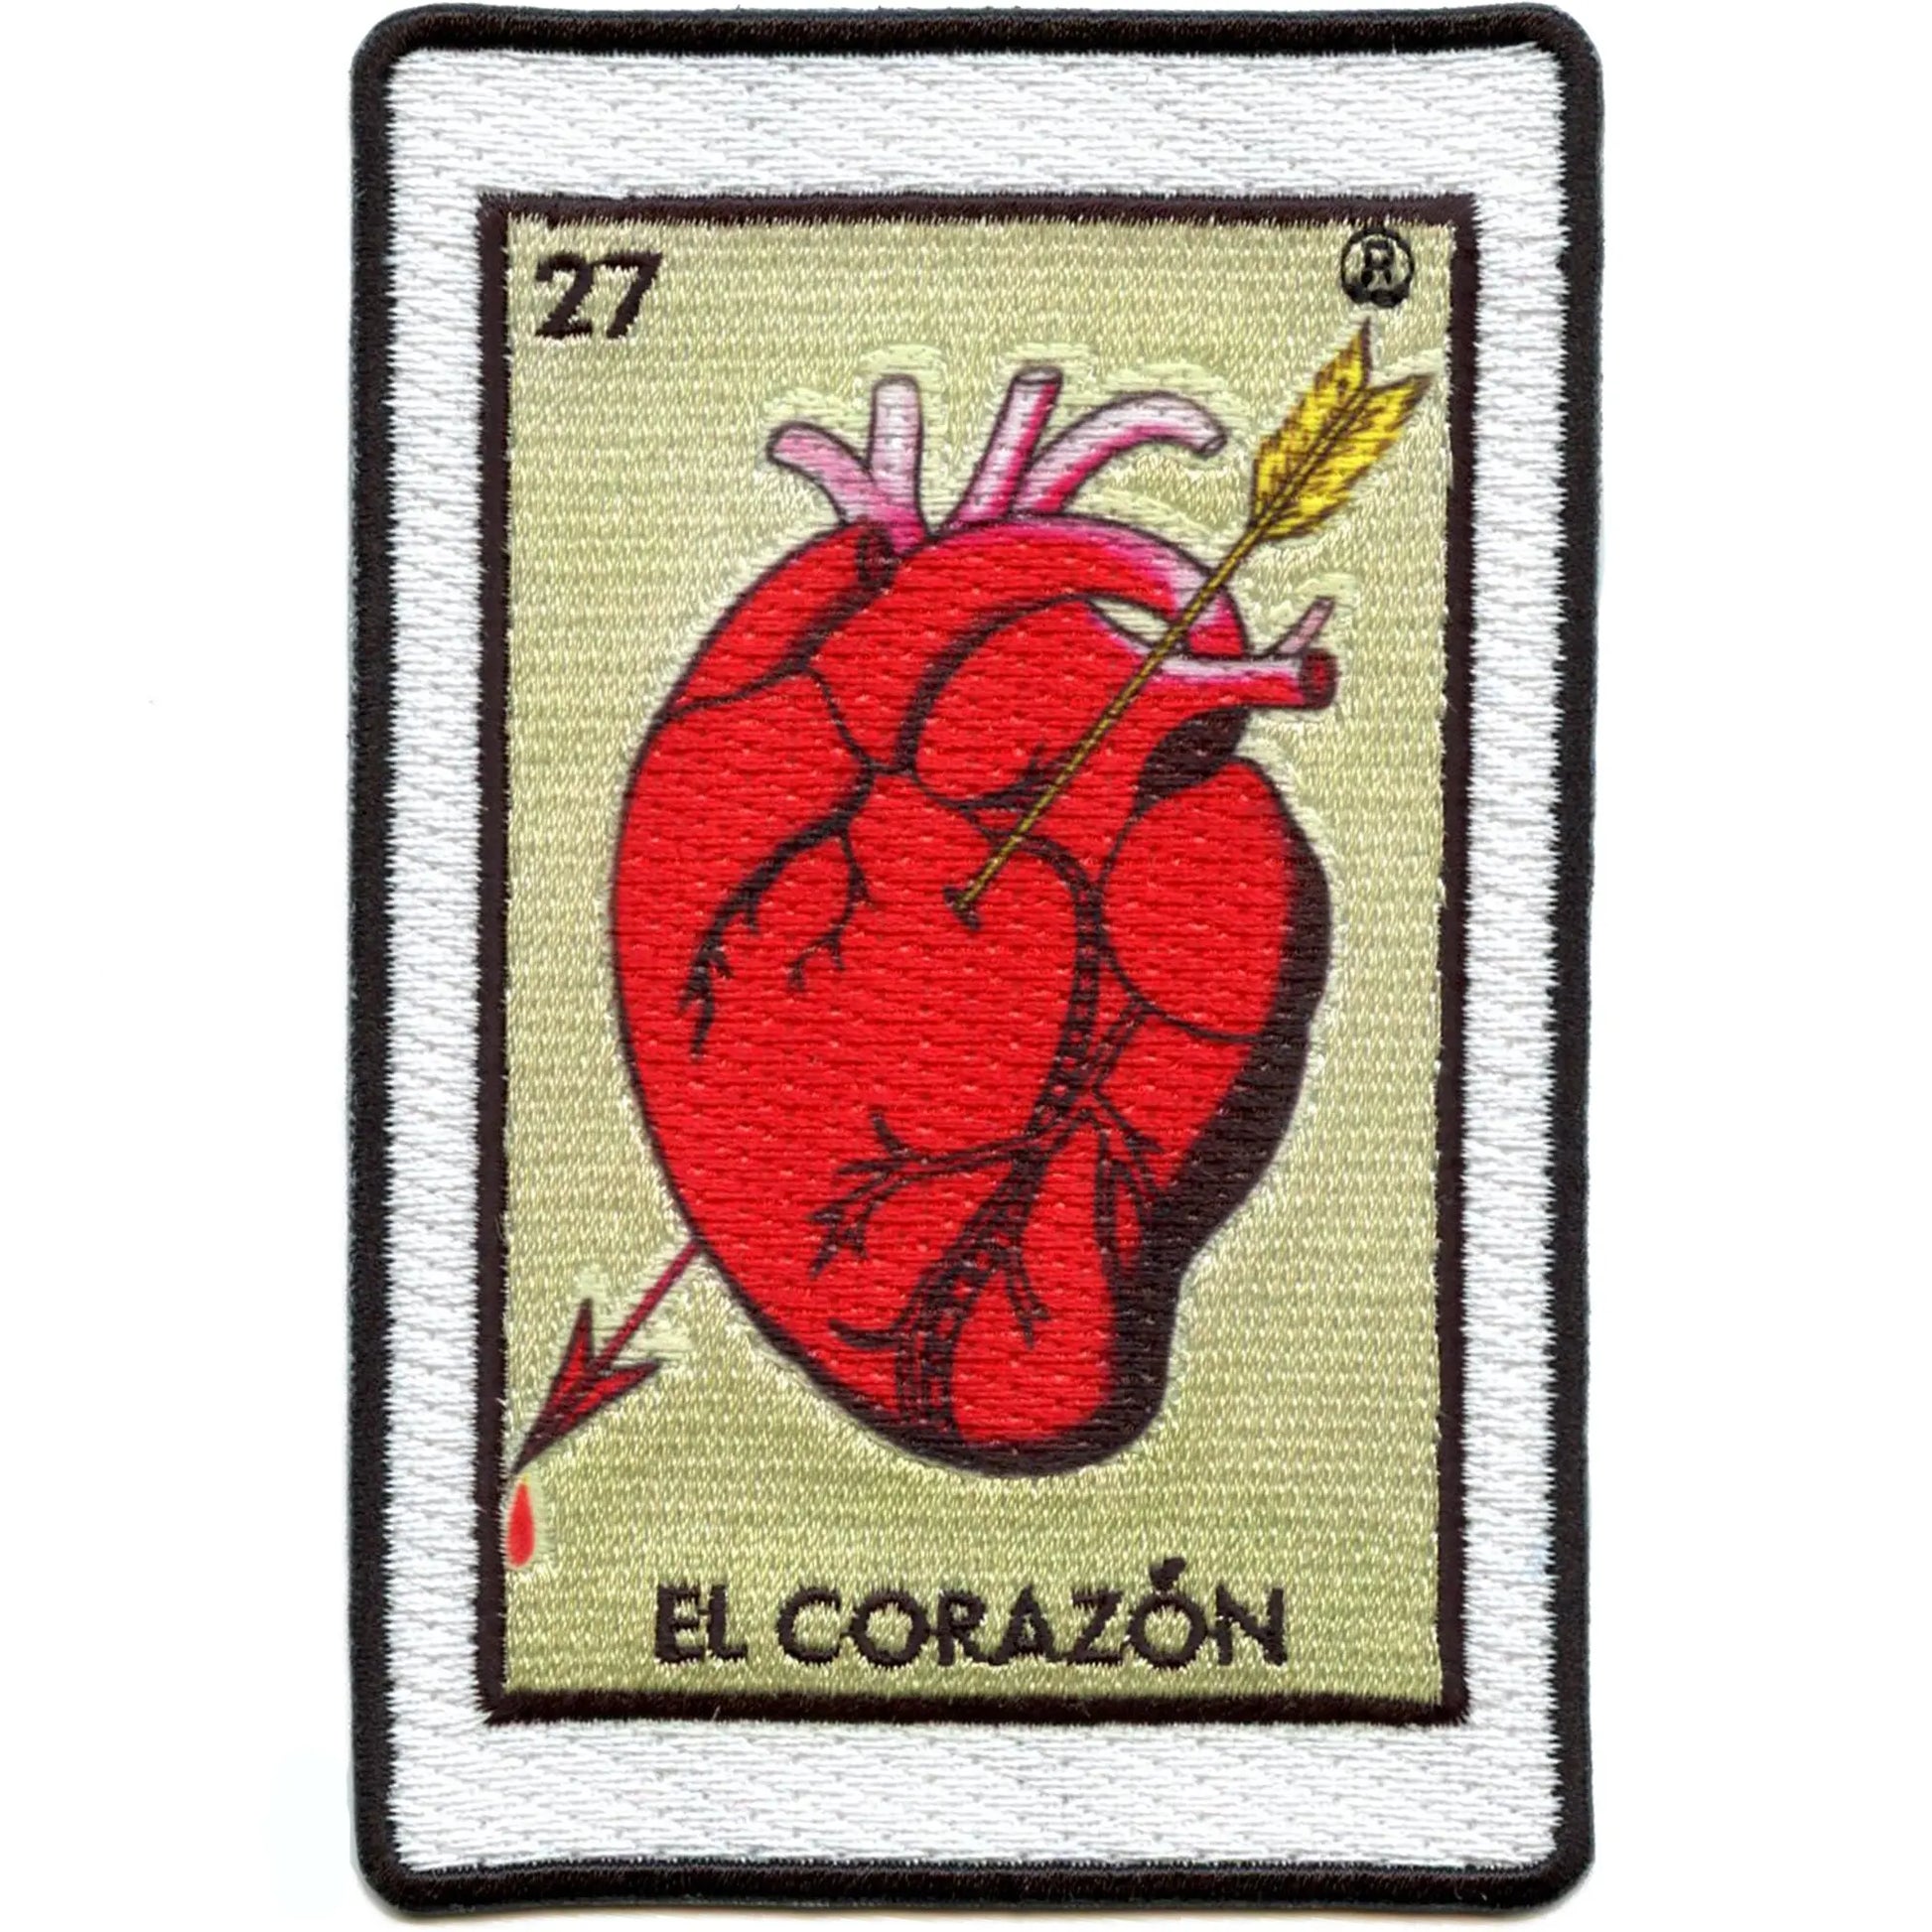 El Corazon 27 Patch Mexican Loteria Card Sublimated Embroidery Iron On